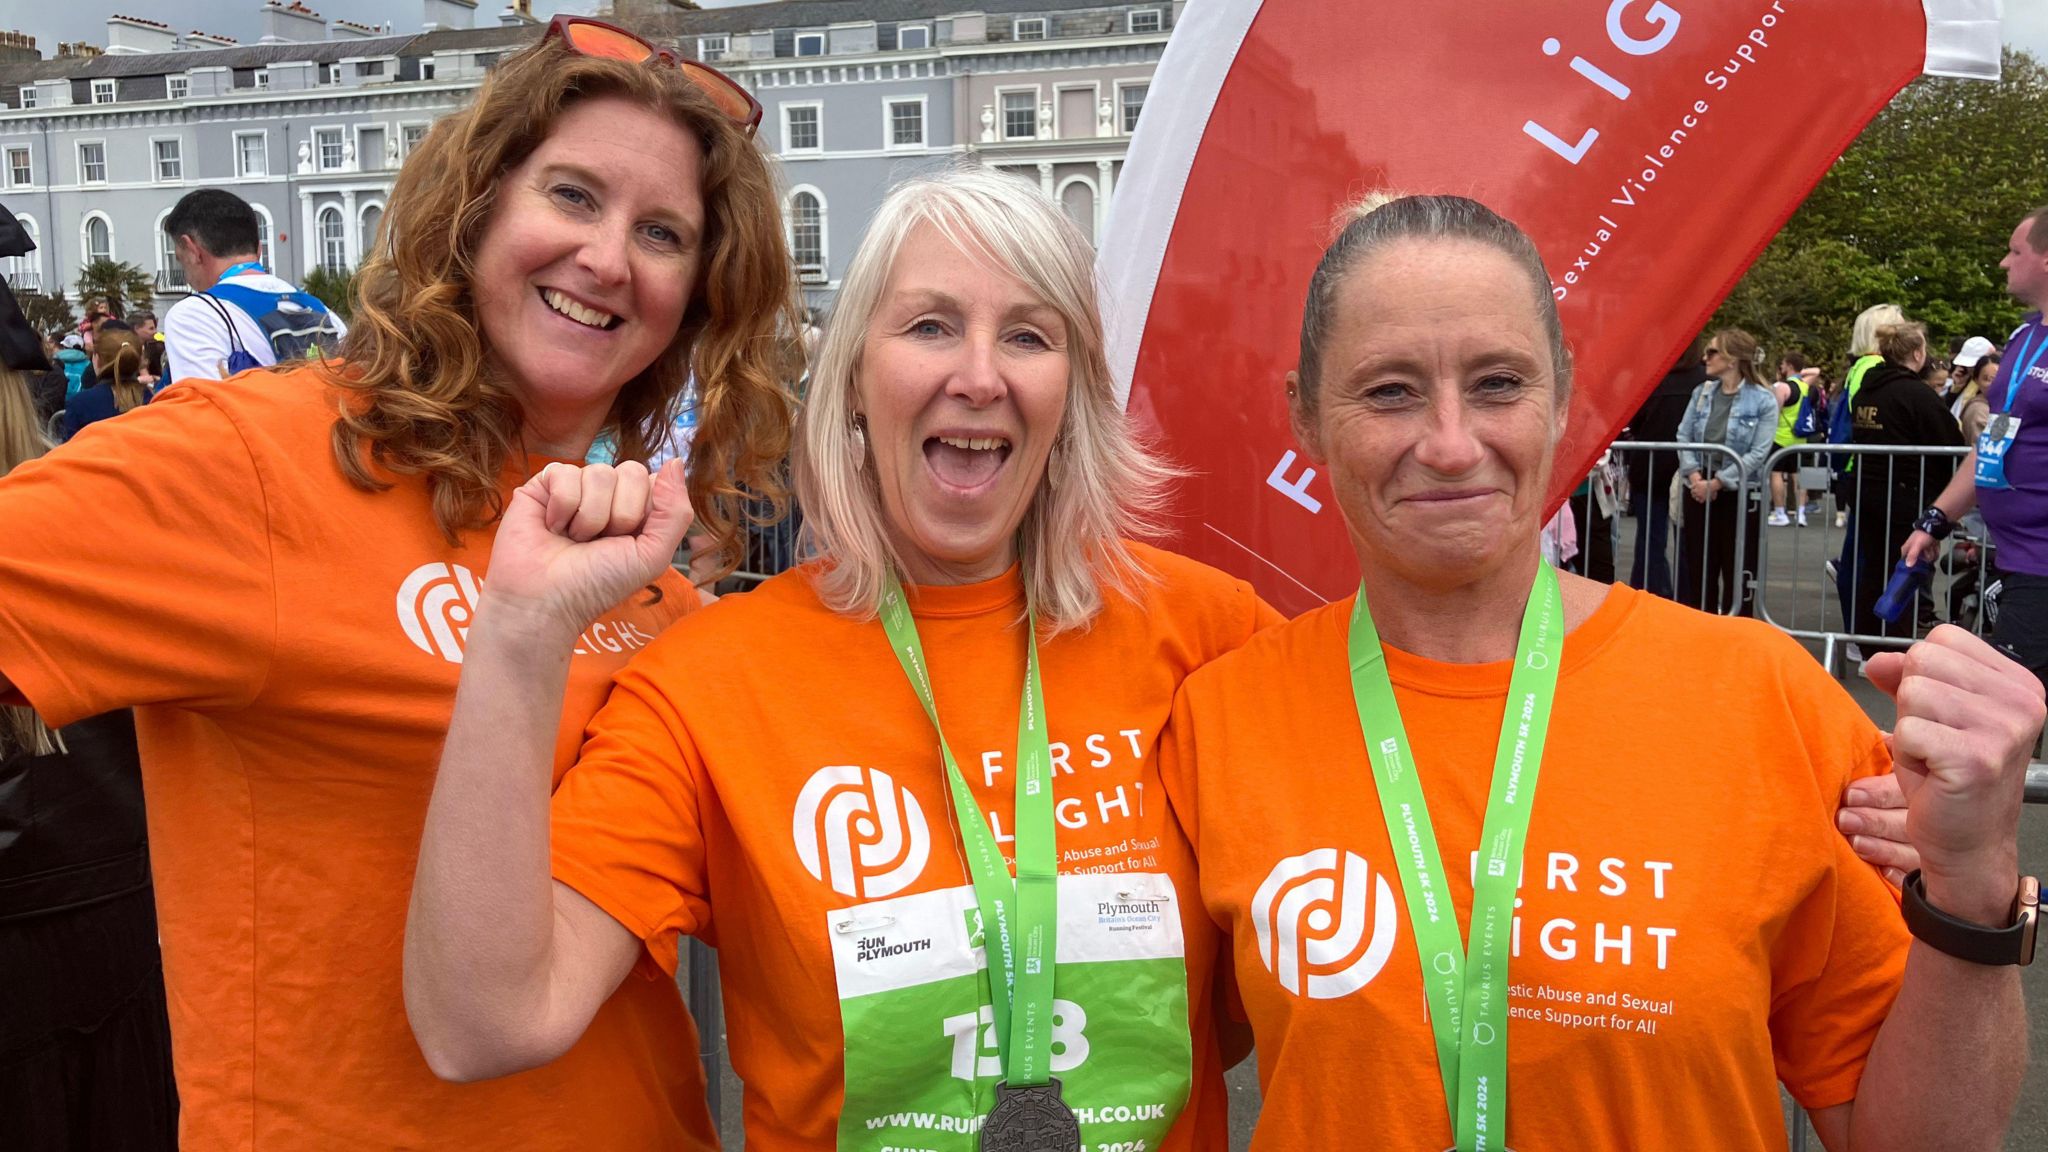 Anna Mitchell-Fundraiser, Siobhan Breslin-runner, Donna Hewings-runner, from Plymouth